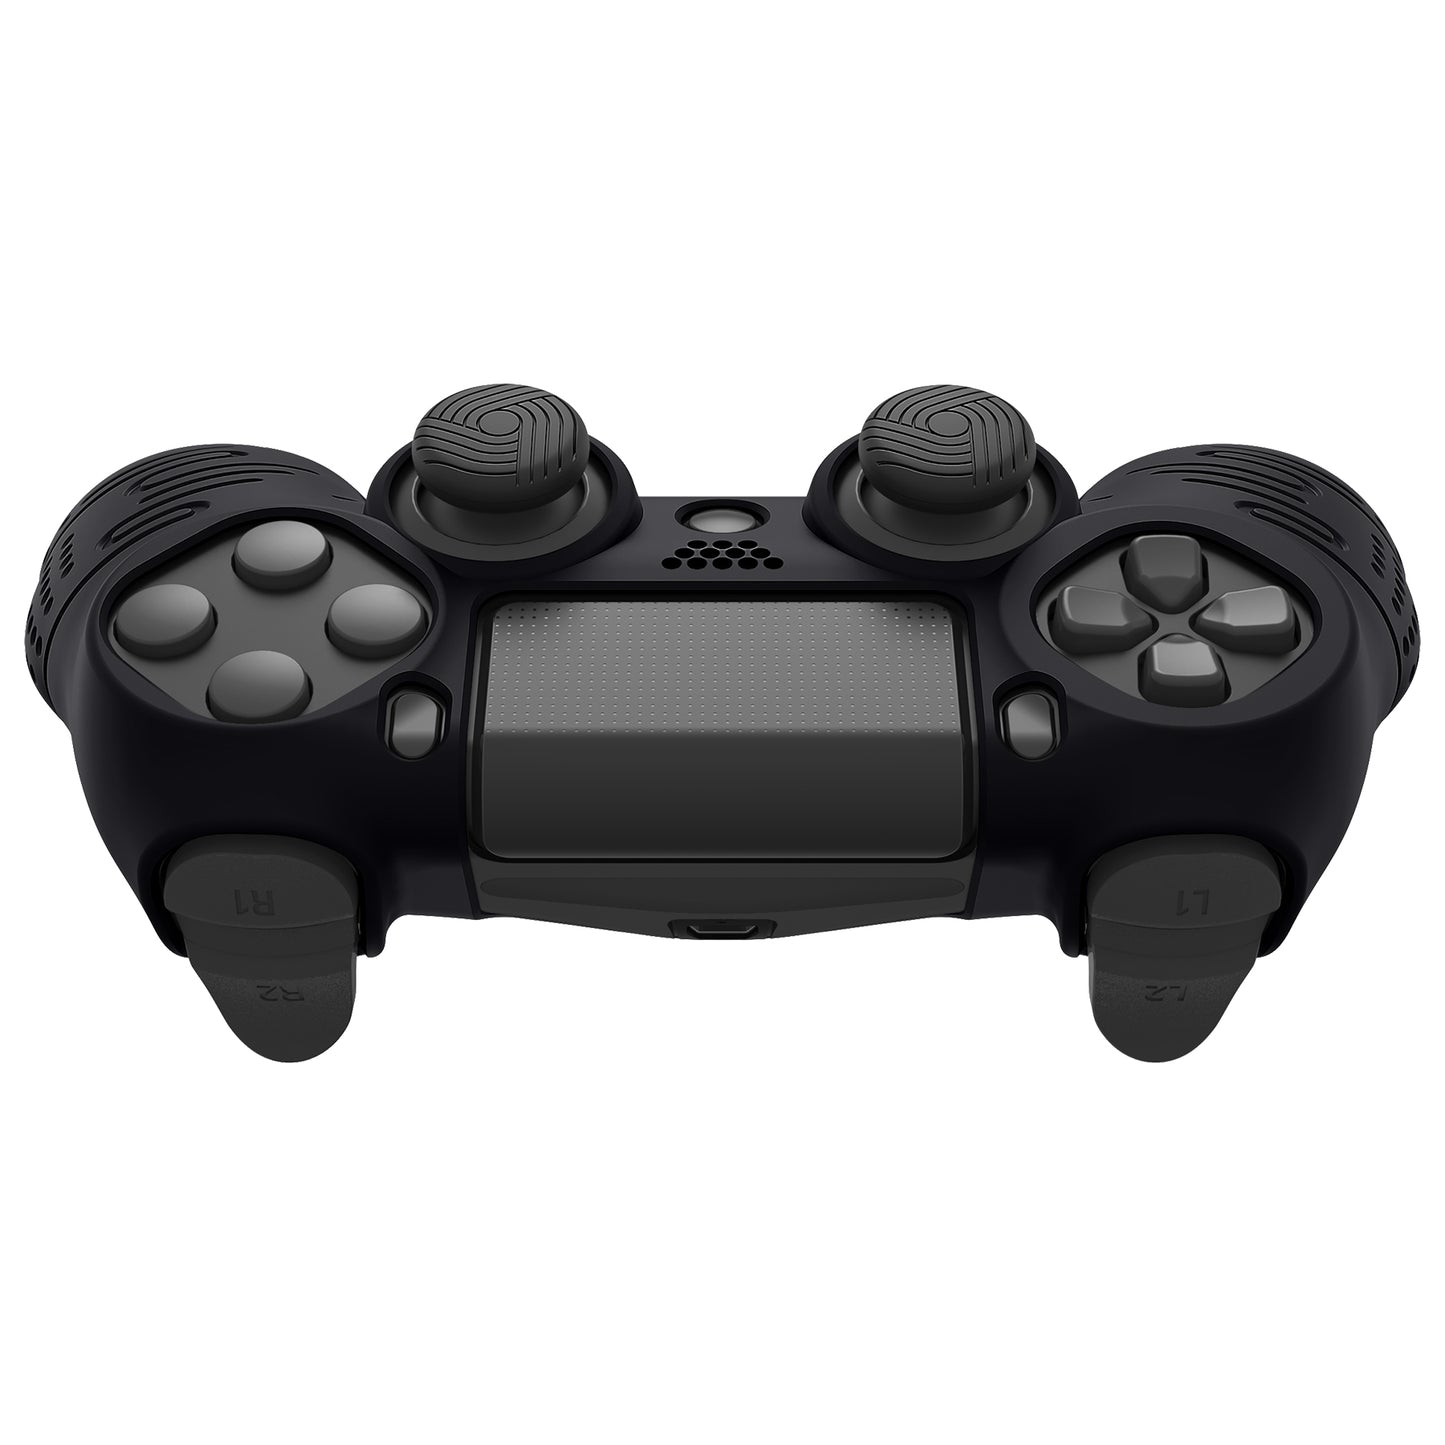 PlayVital Line & Dot Silicone Cover Skin with Thumb Grip Caps for PS4 Slim Pro Controller - Black - CLRP4P001